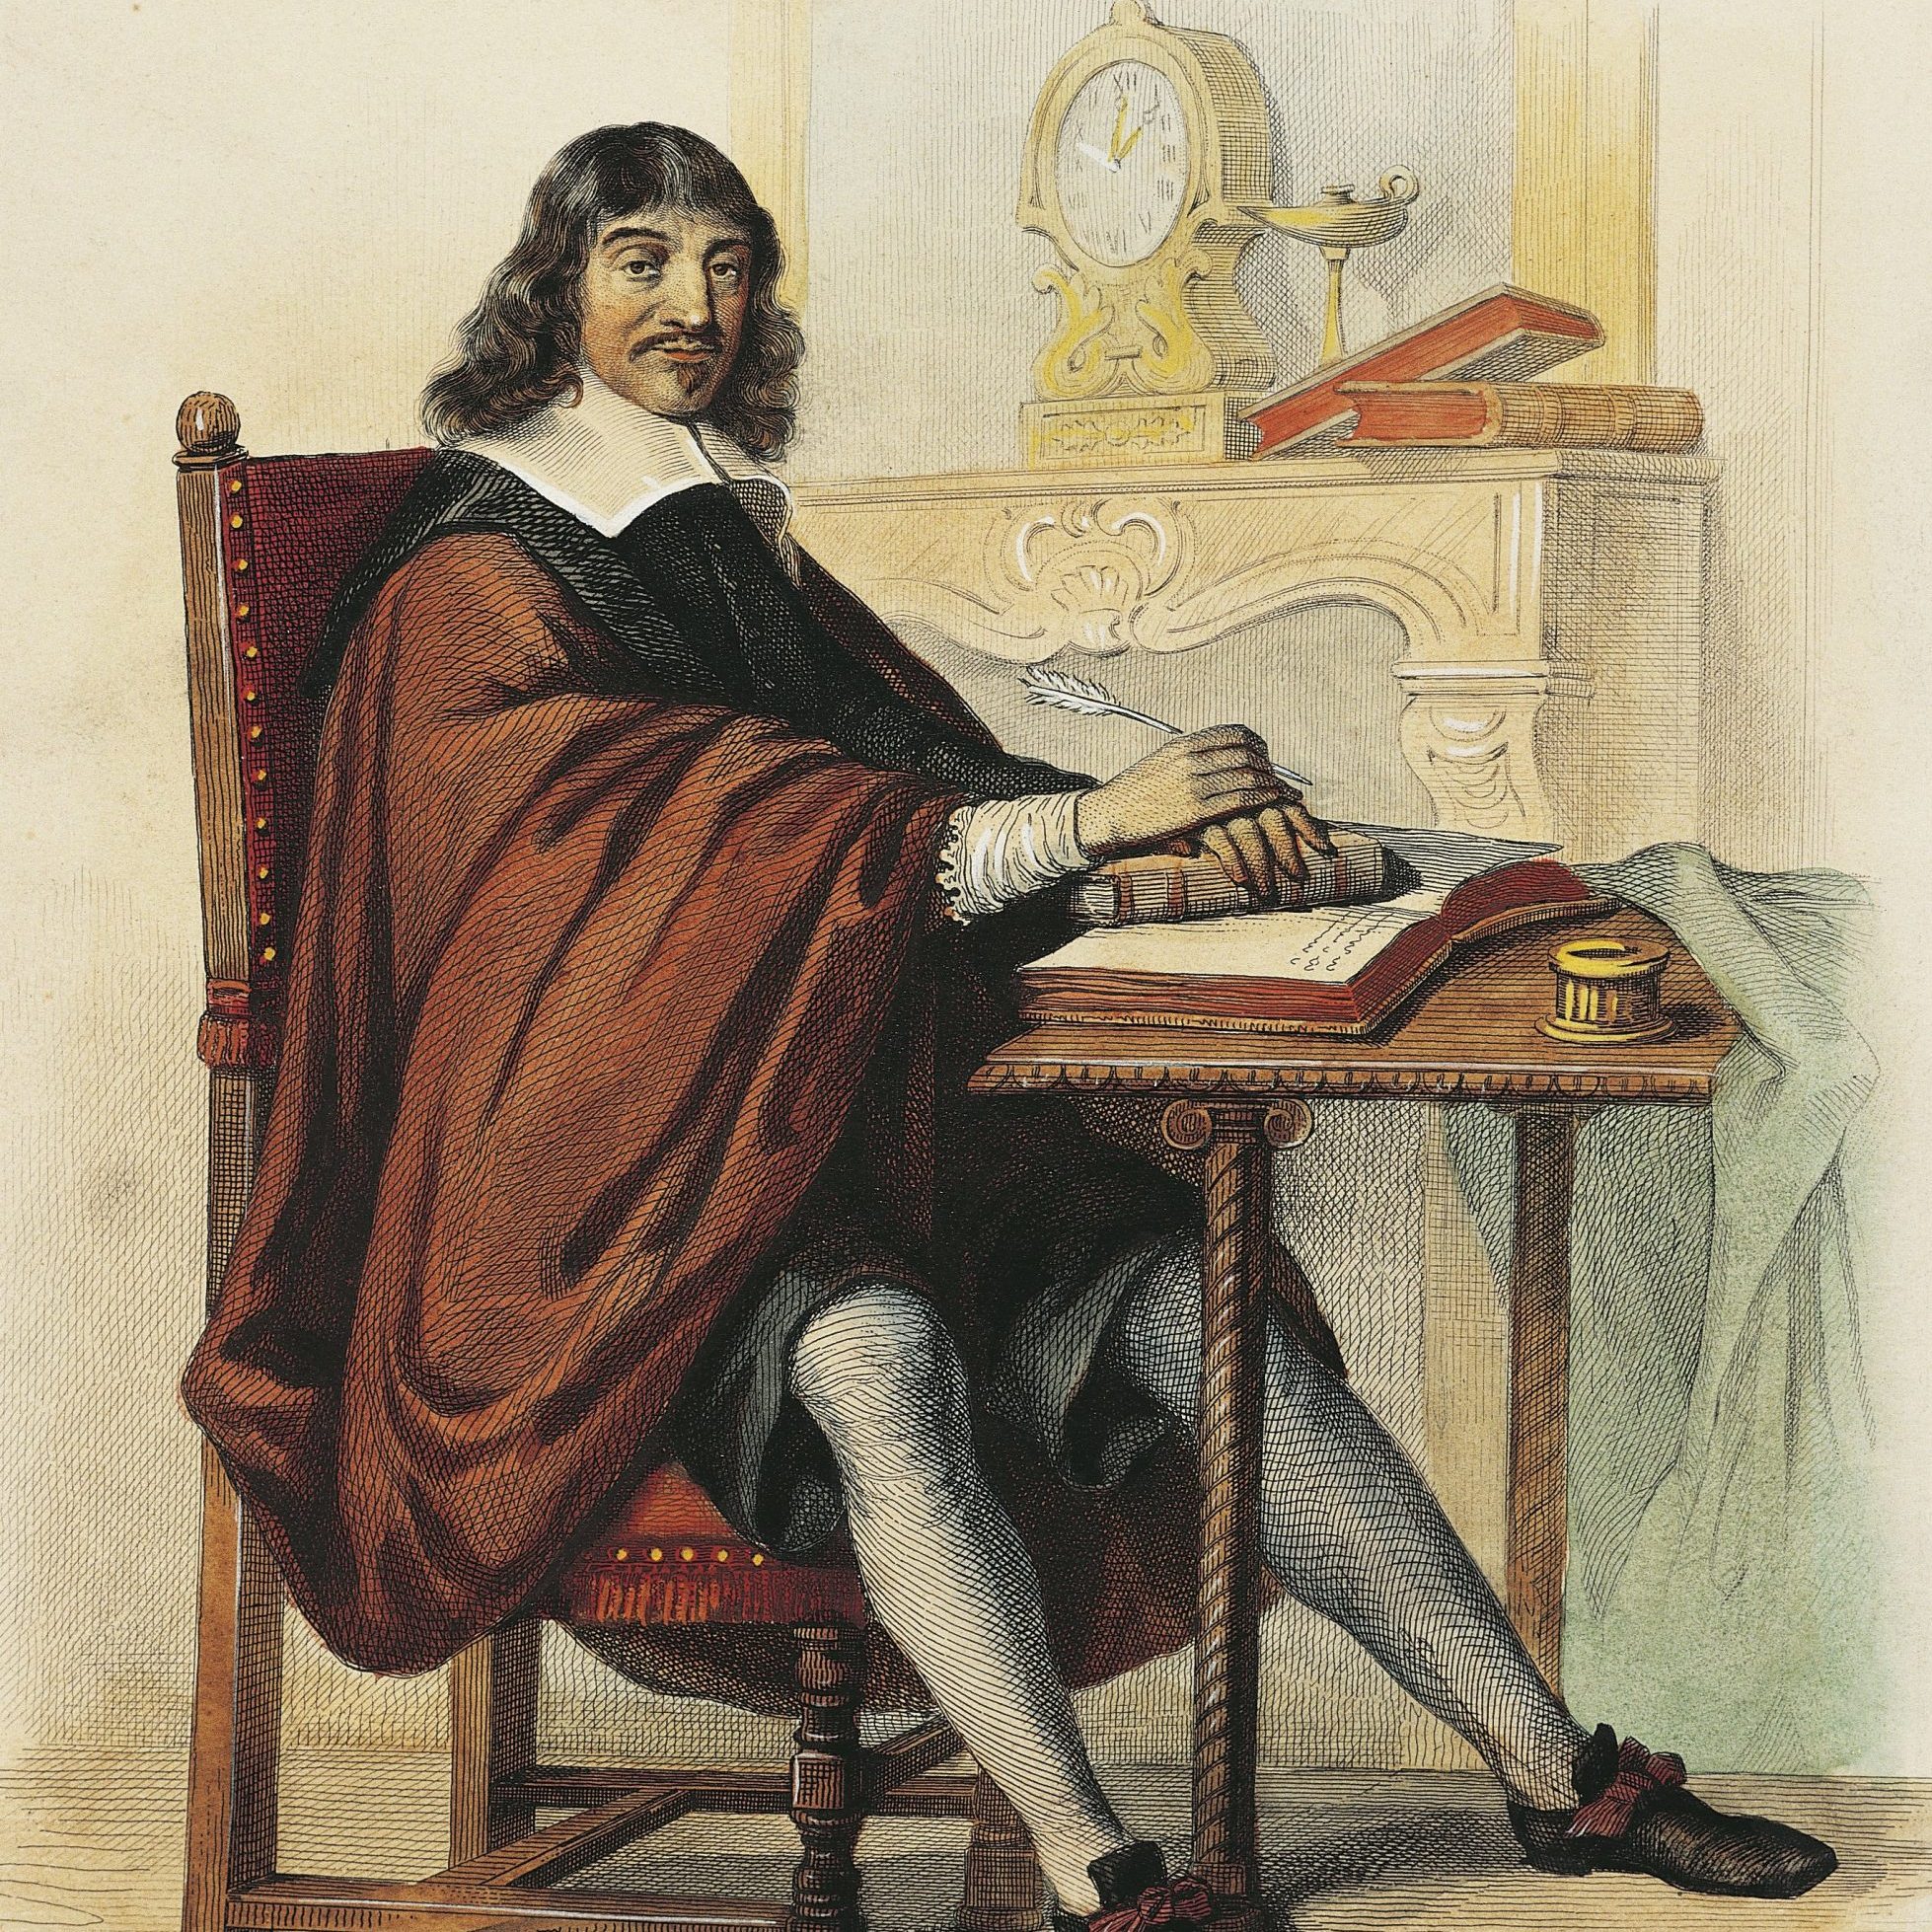 France, Paris, Portrait of Rene Descartes (also known as Cartesio 1596 - 1650), French mathematician and philospher, print